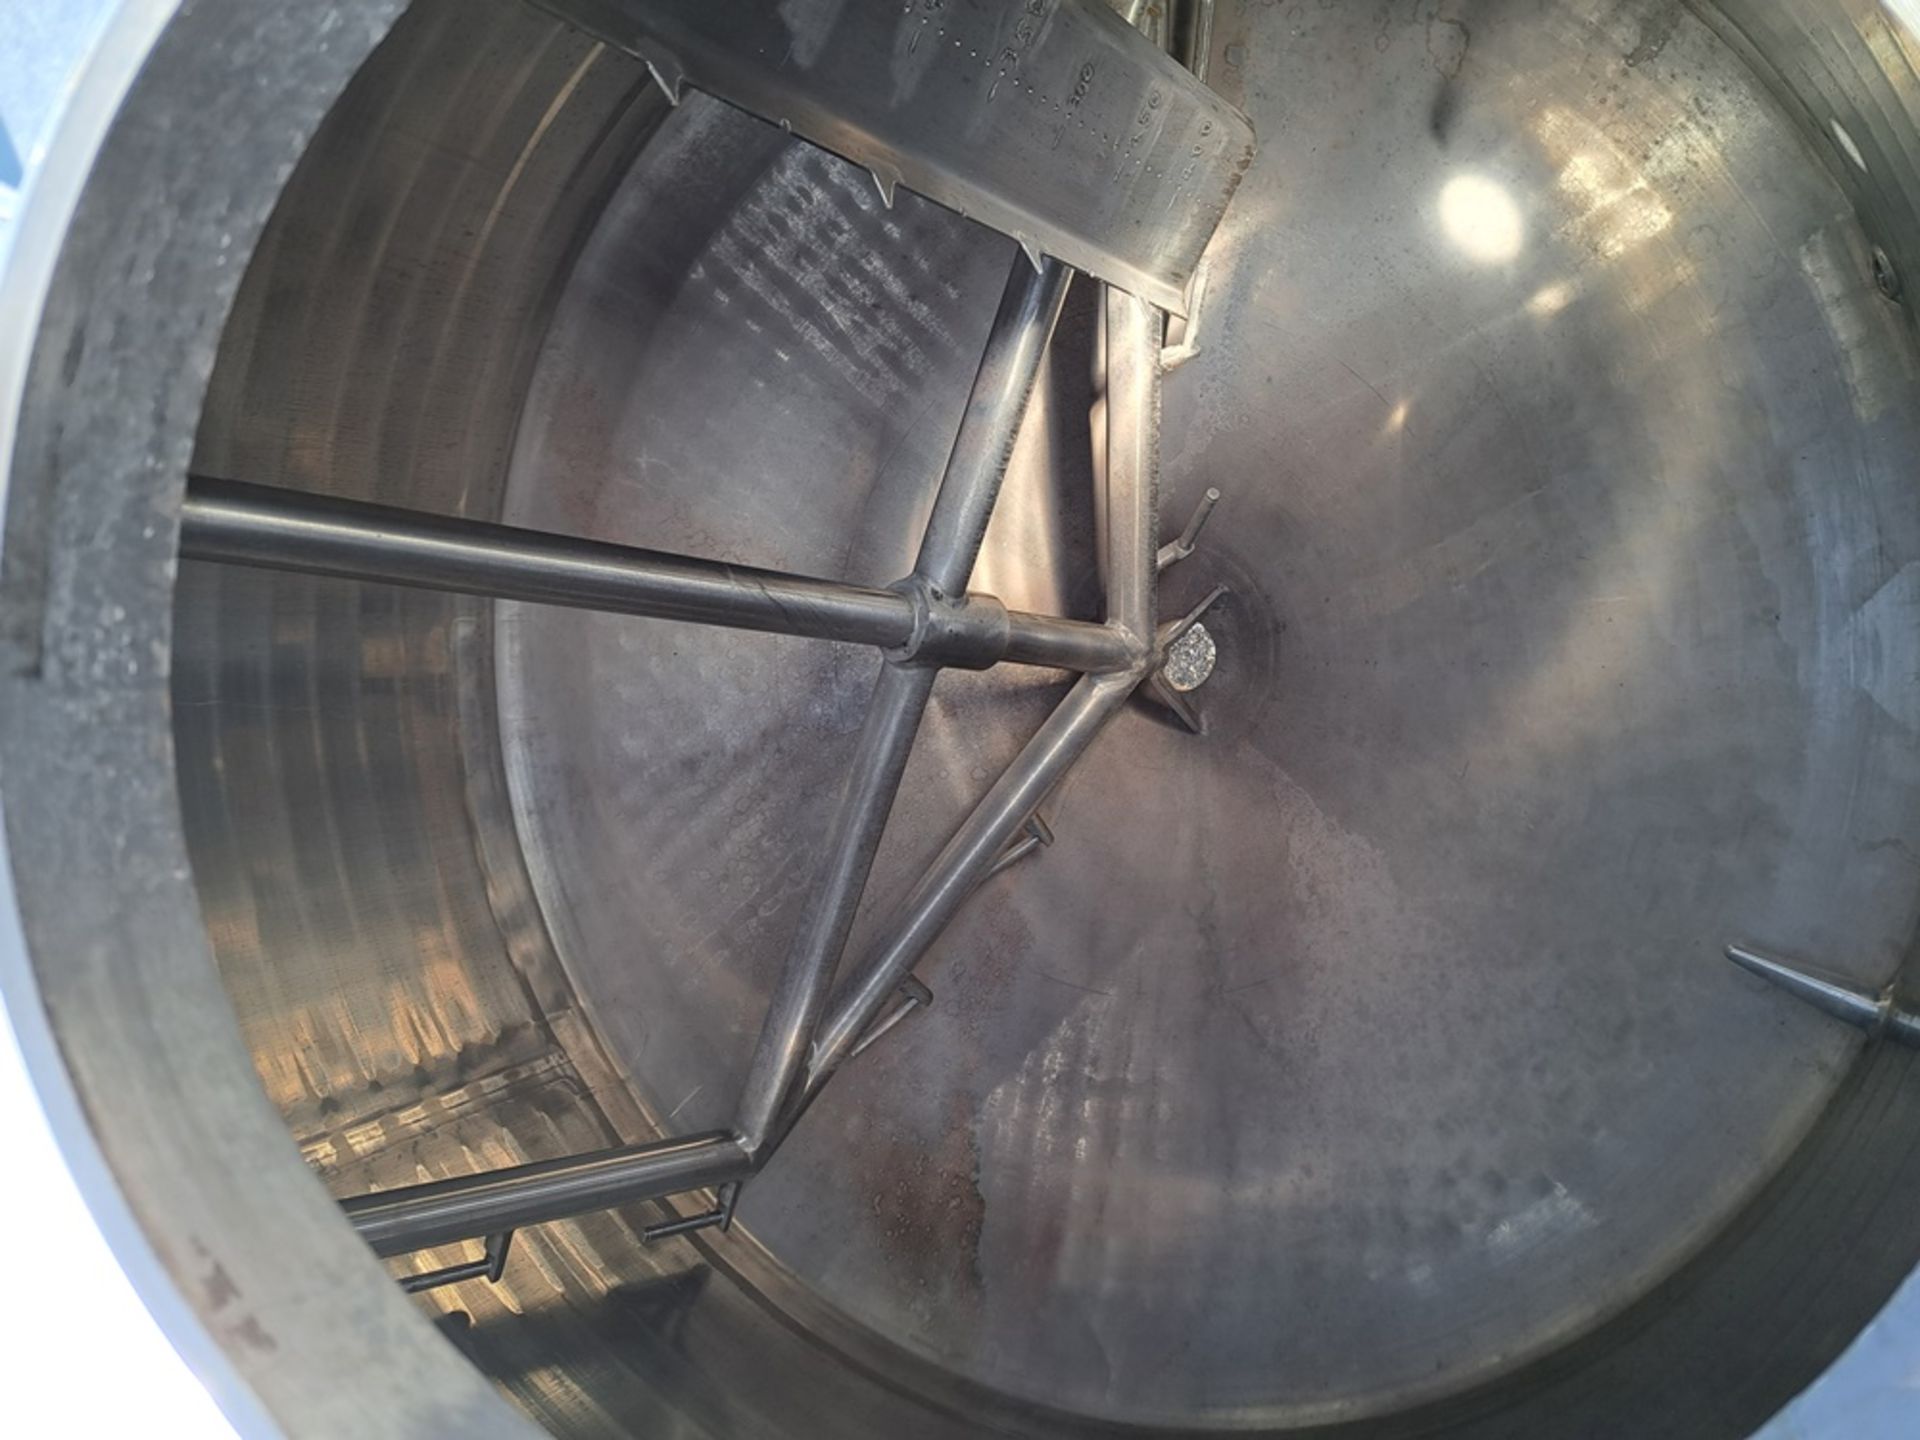 Walker Stainless Steel Jacketed Mix Tank with mixer, (no motor), 5' diameter X 5' deep cone - Image 6 of 6